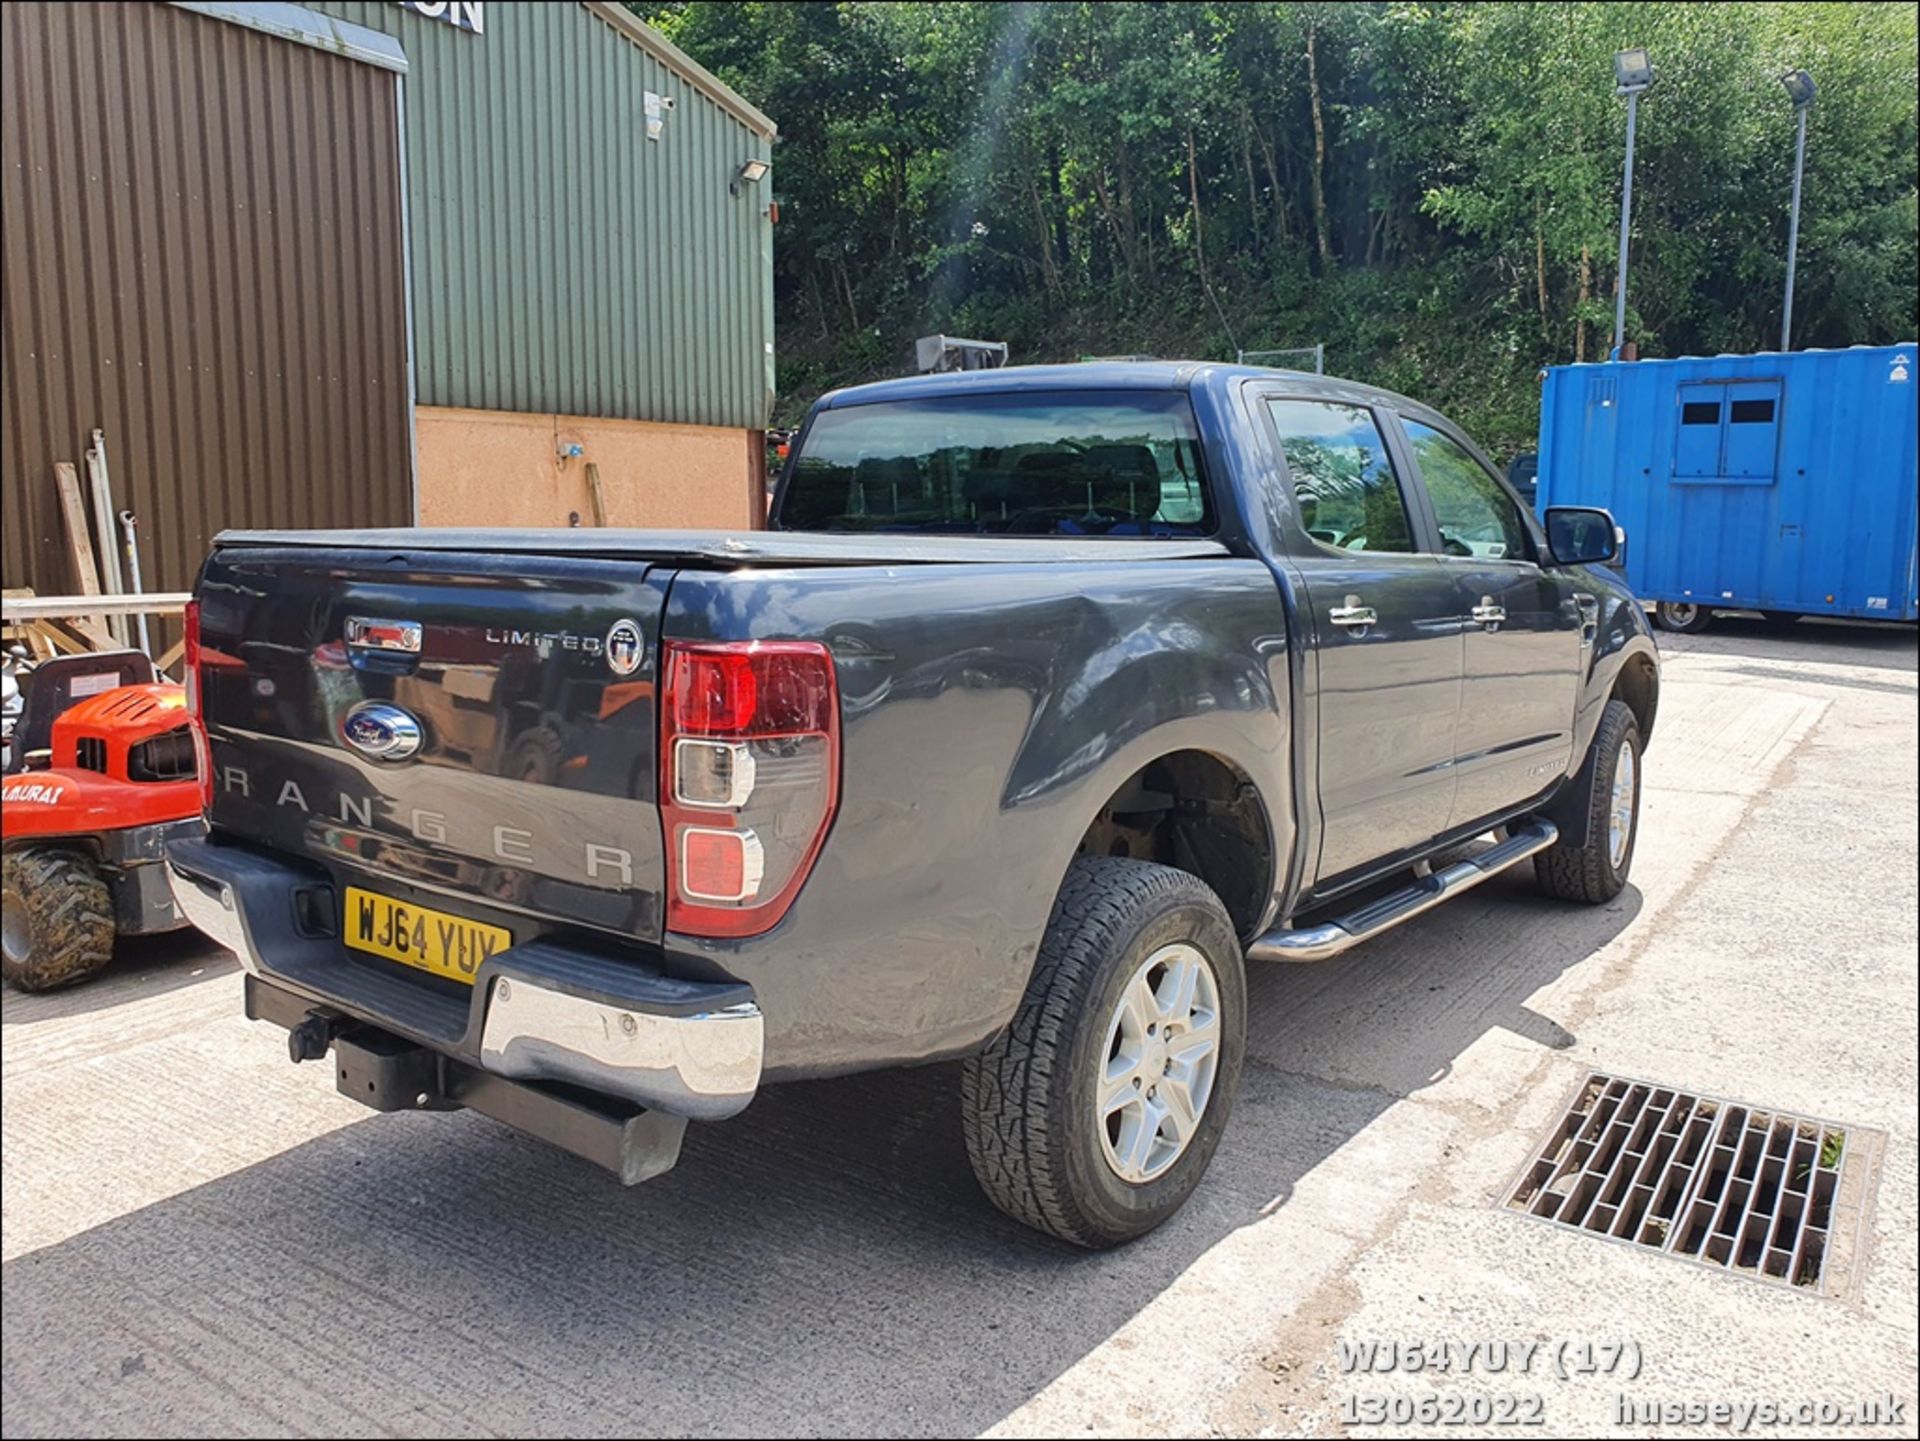 14/64 FORD RANGER LIMITED 4X4 TDCI - 2198cc 4dr 4x4 (Grey, 106k) - Image 17 of 43